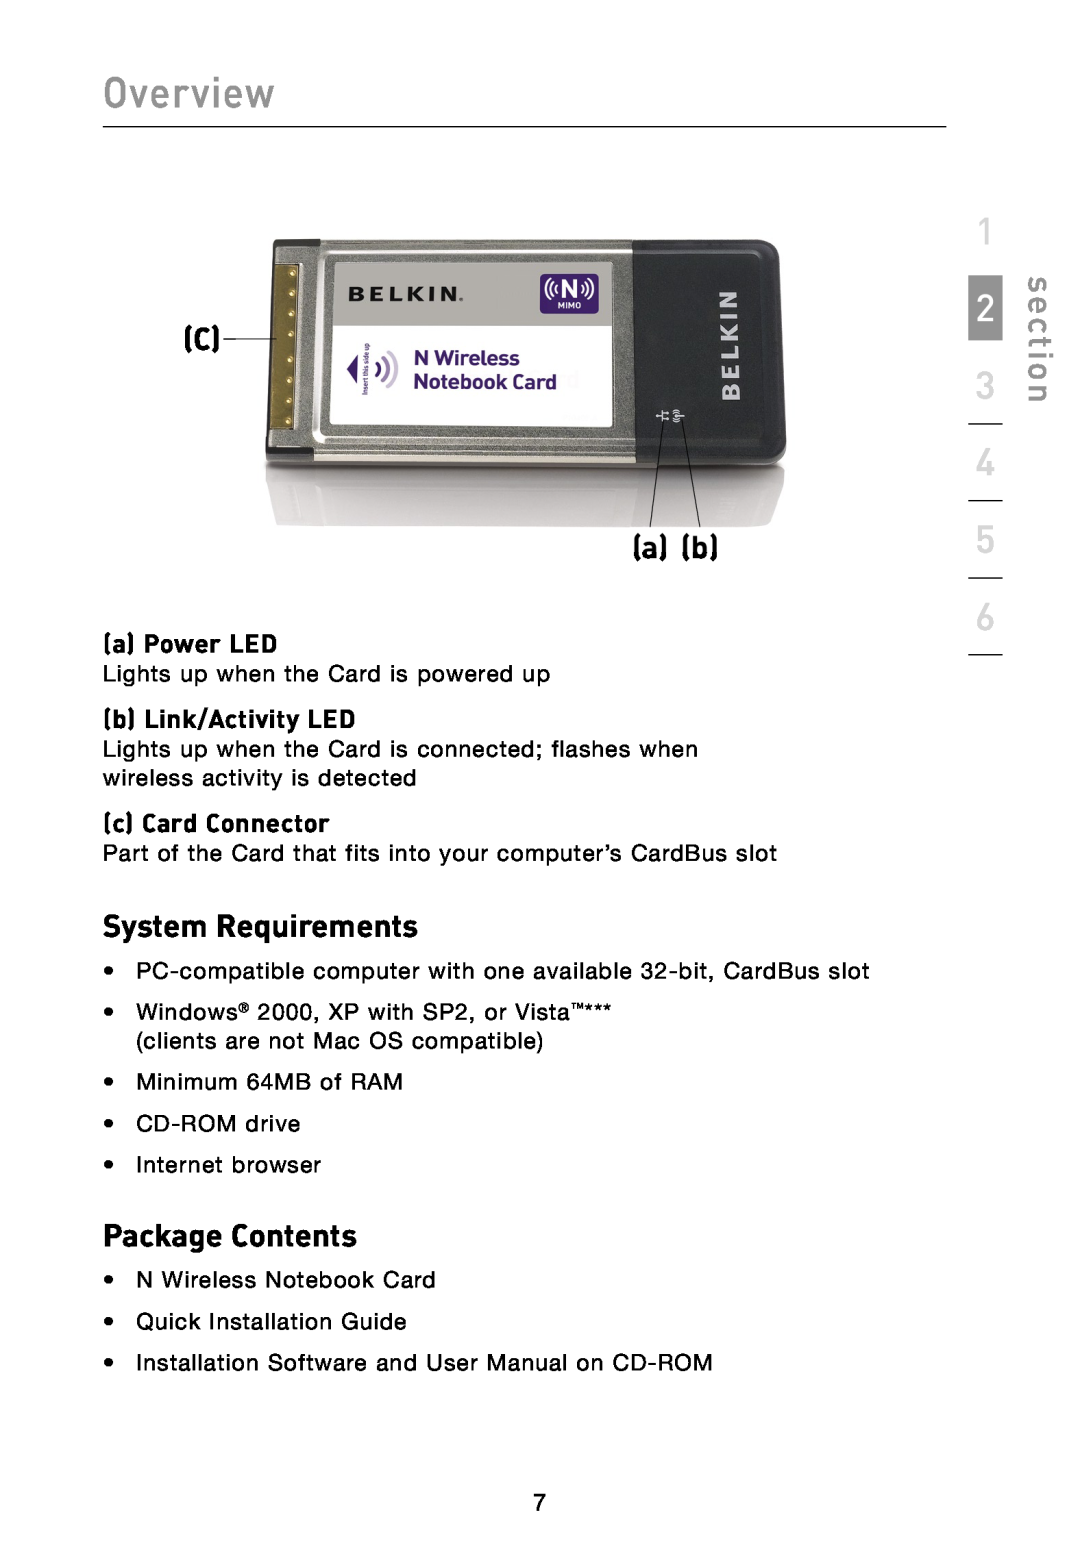 Belkin F5D8013 C a b, System Requirements, Package Contents, a Power LED, b Link/Activity LED, c Card Connector, Overview 